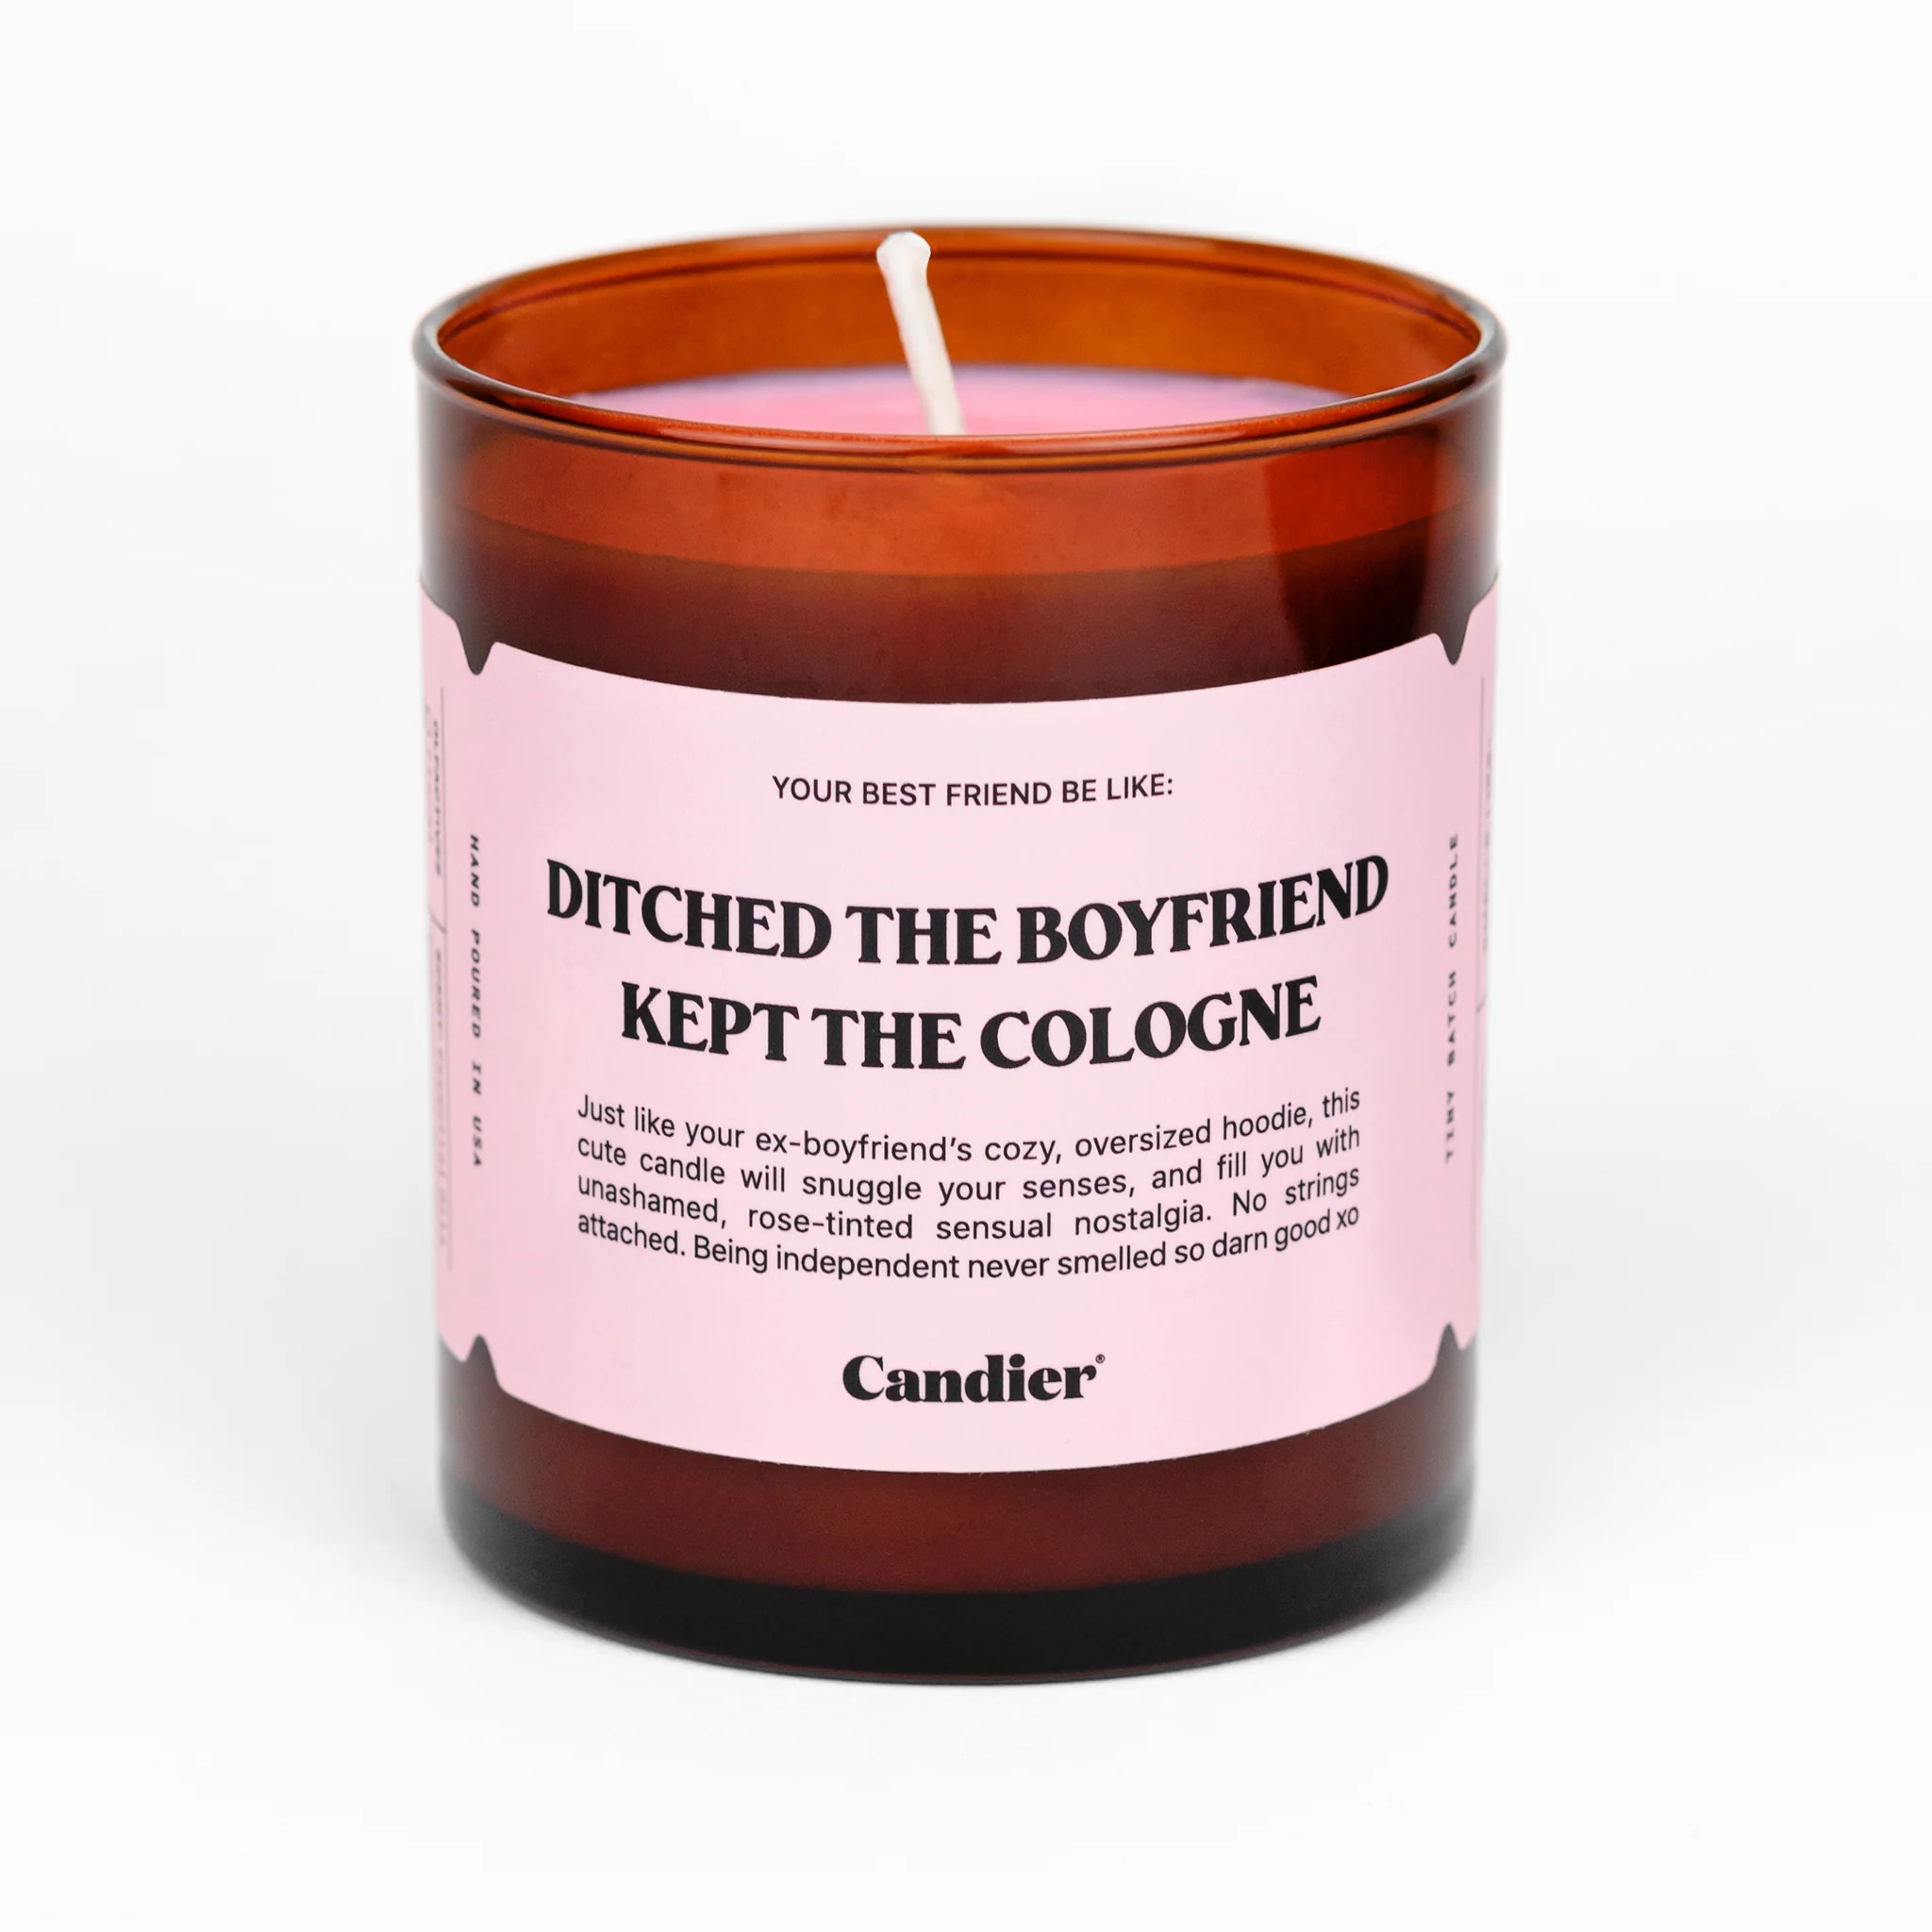 DITCHED THE BOYFRIEND CANDLE | Candier by Ryan Porter